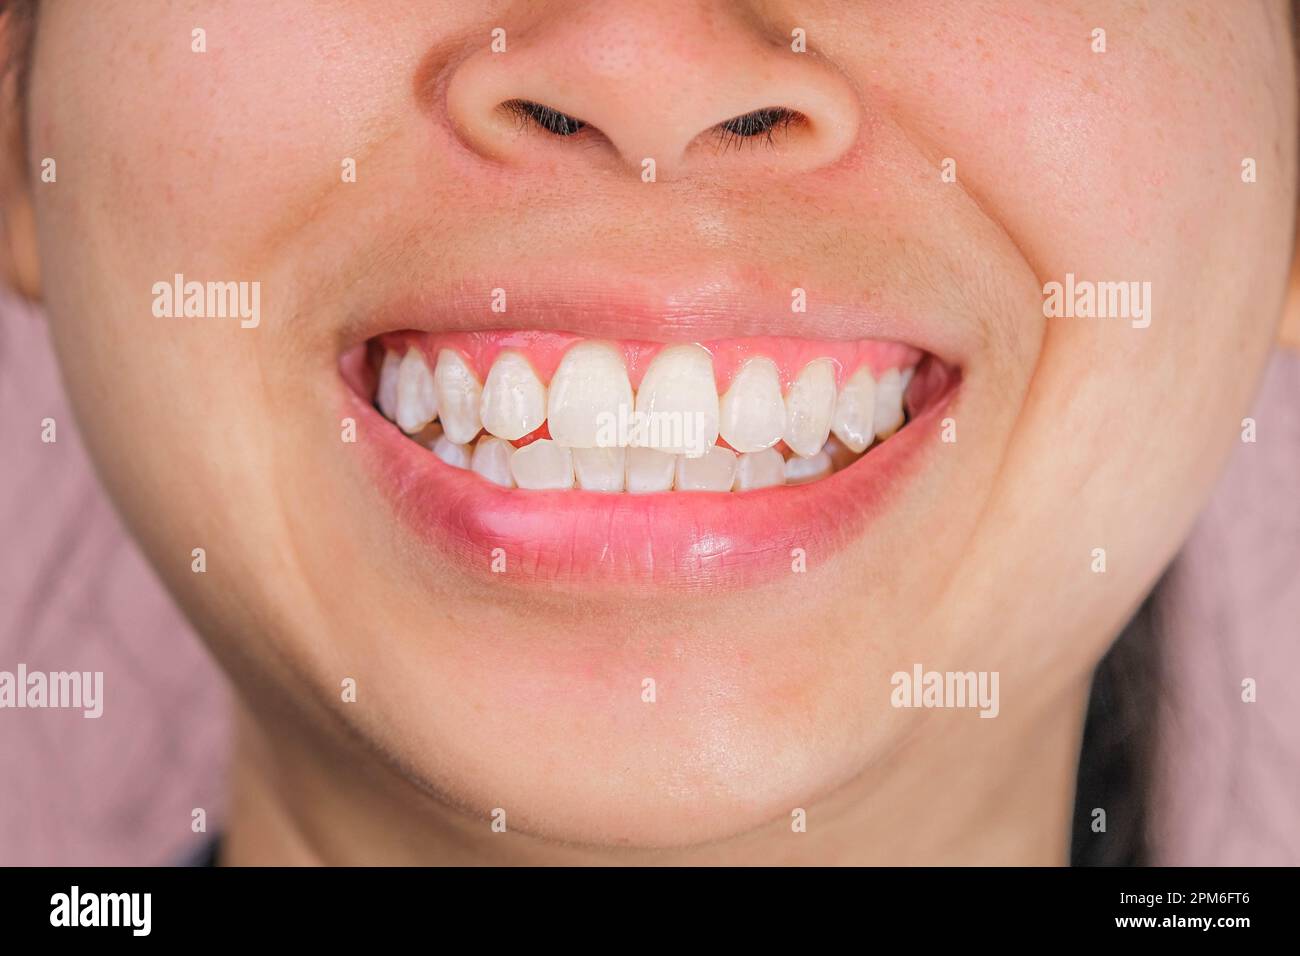 Close-up of front view of happy asian woman smiling broadly revealing her beautiful white teeth isolated on pink background. Stock Photo